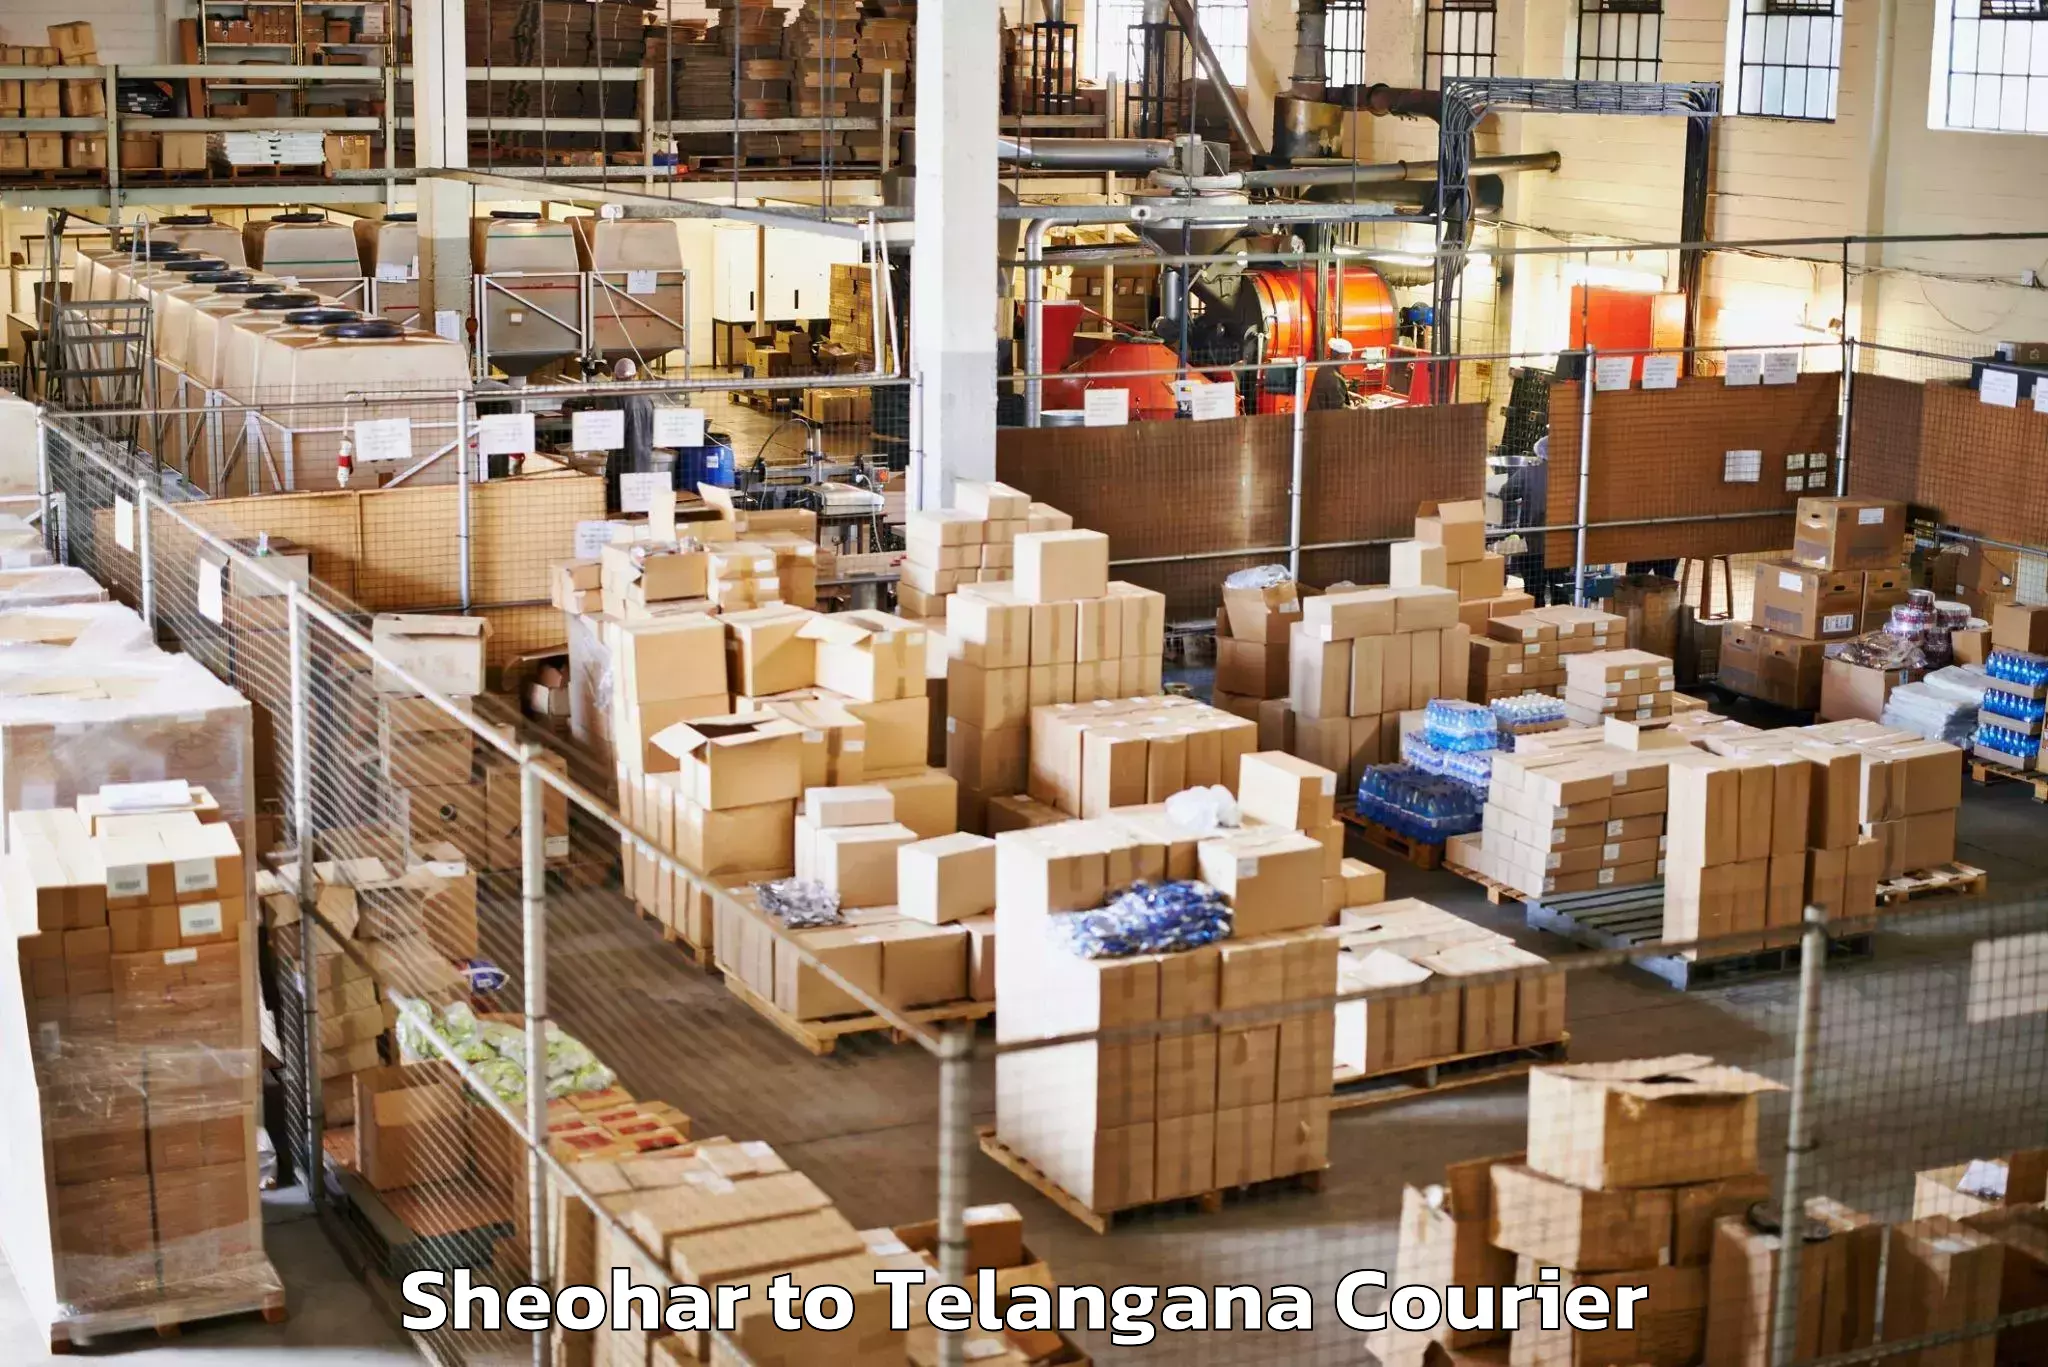 Hassle-free luggage shipping in Sheohar to Secunderabad